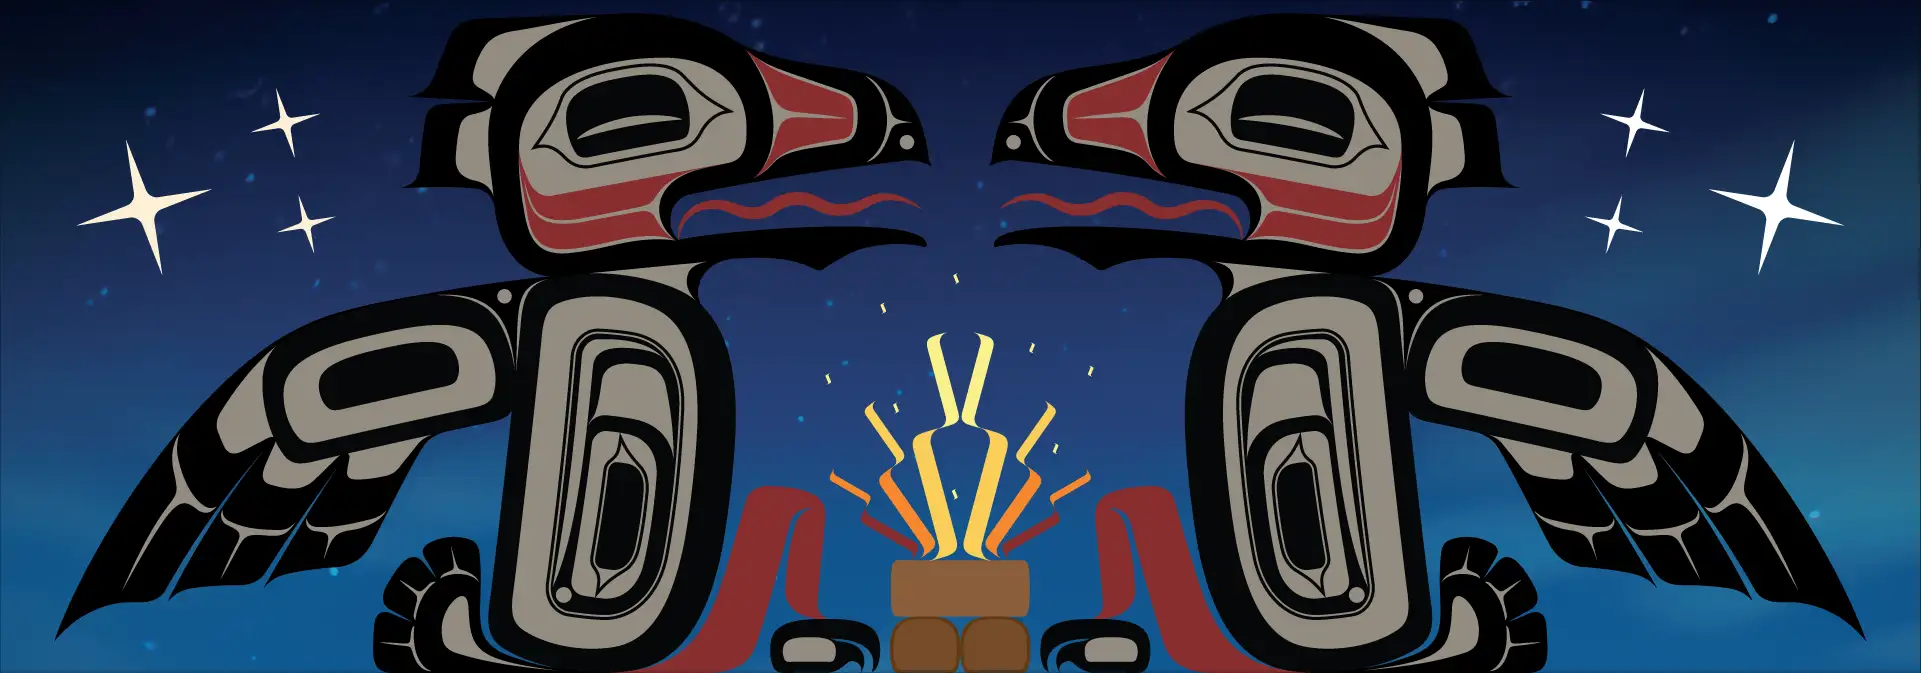 Tlingit line form art of two birds sitting around a fire during a star lit night. 